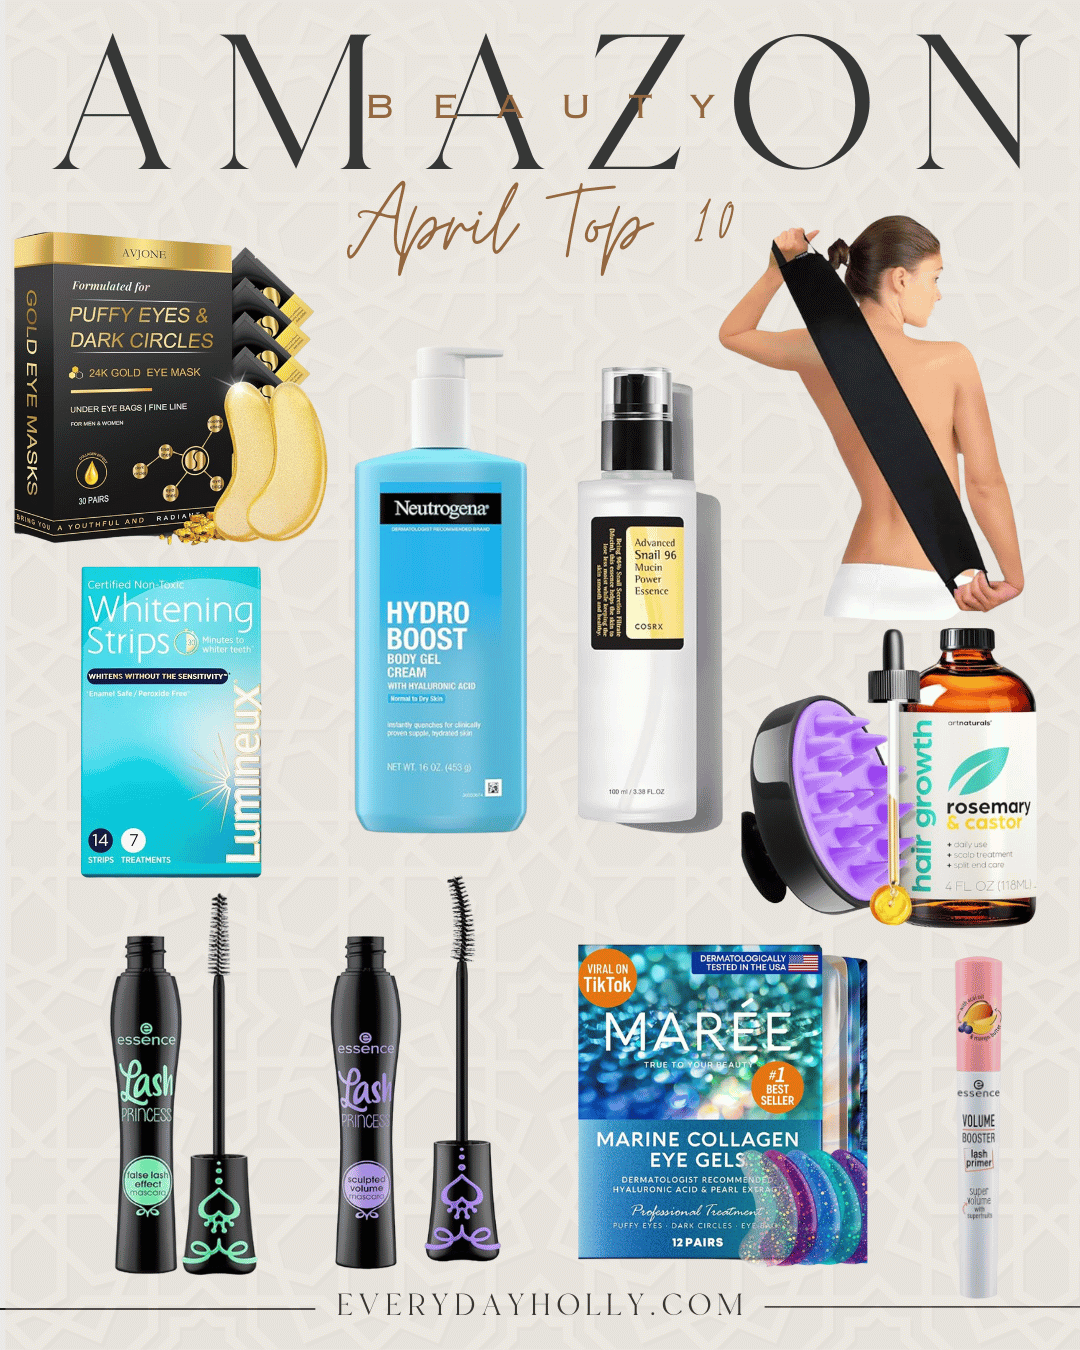 Top 10 hottest best sellers from april | best sellers, monthly top sellers, fashion, home, beauty, everyday fashion, beauty, beauty favorites, skincare, self care, hair care, eye mask, castor oil, eye gel, collagen